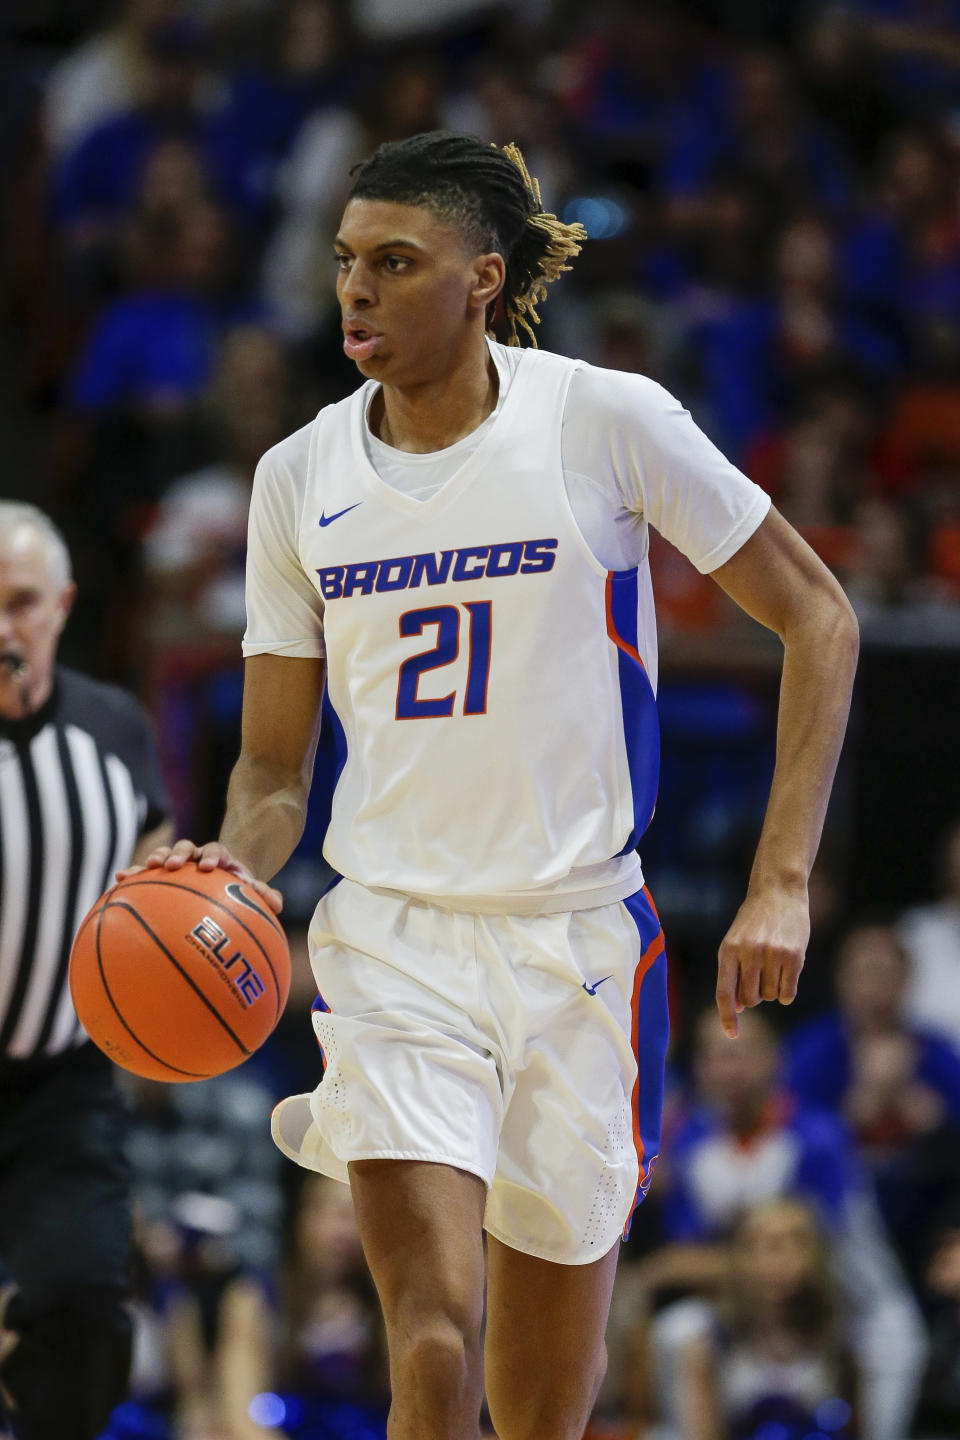 Boise State guard Derrick Alston (21) brings during the second half of the team's NCAA college basketball game against San Diego State, Sunday, Feb. 16, 2020, in Boise, Idaho. San Diego State won 72-55. (AP Photo/Steve Conner)